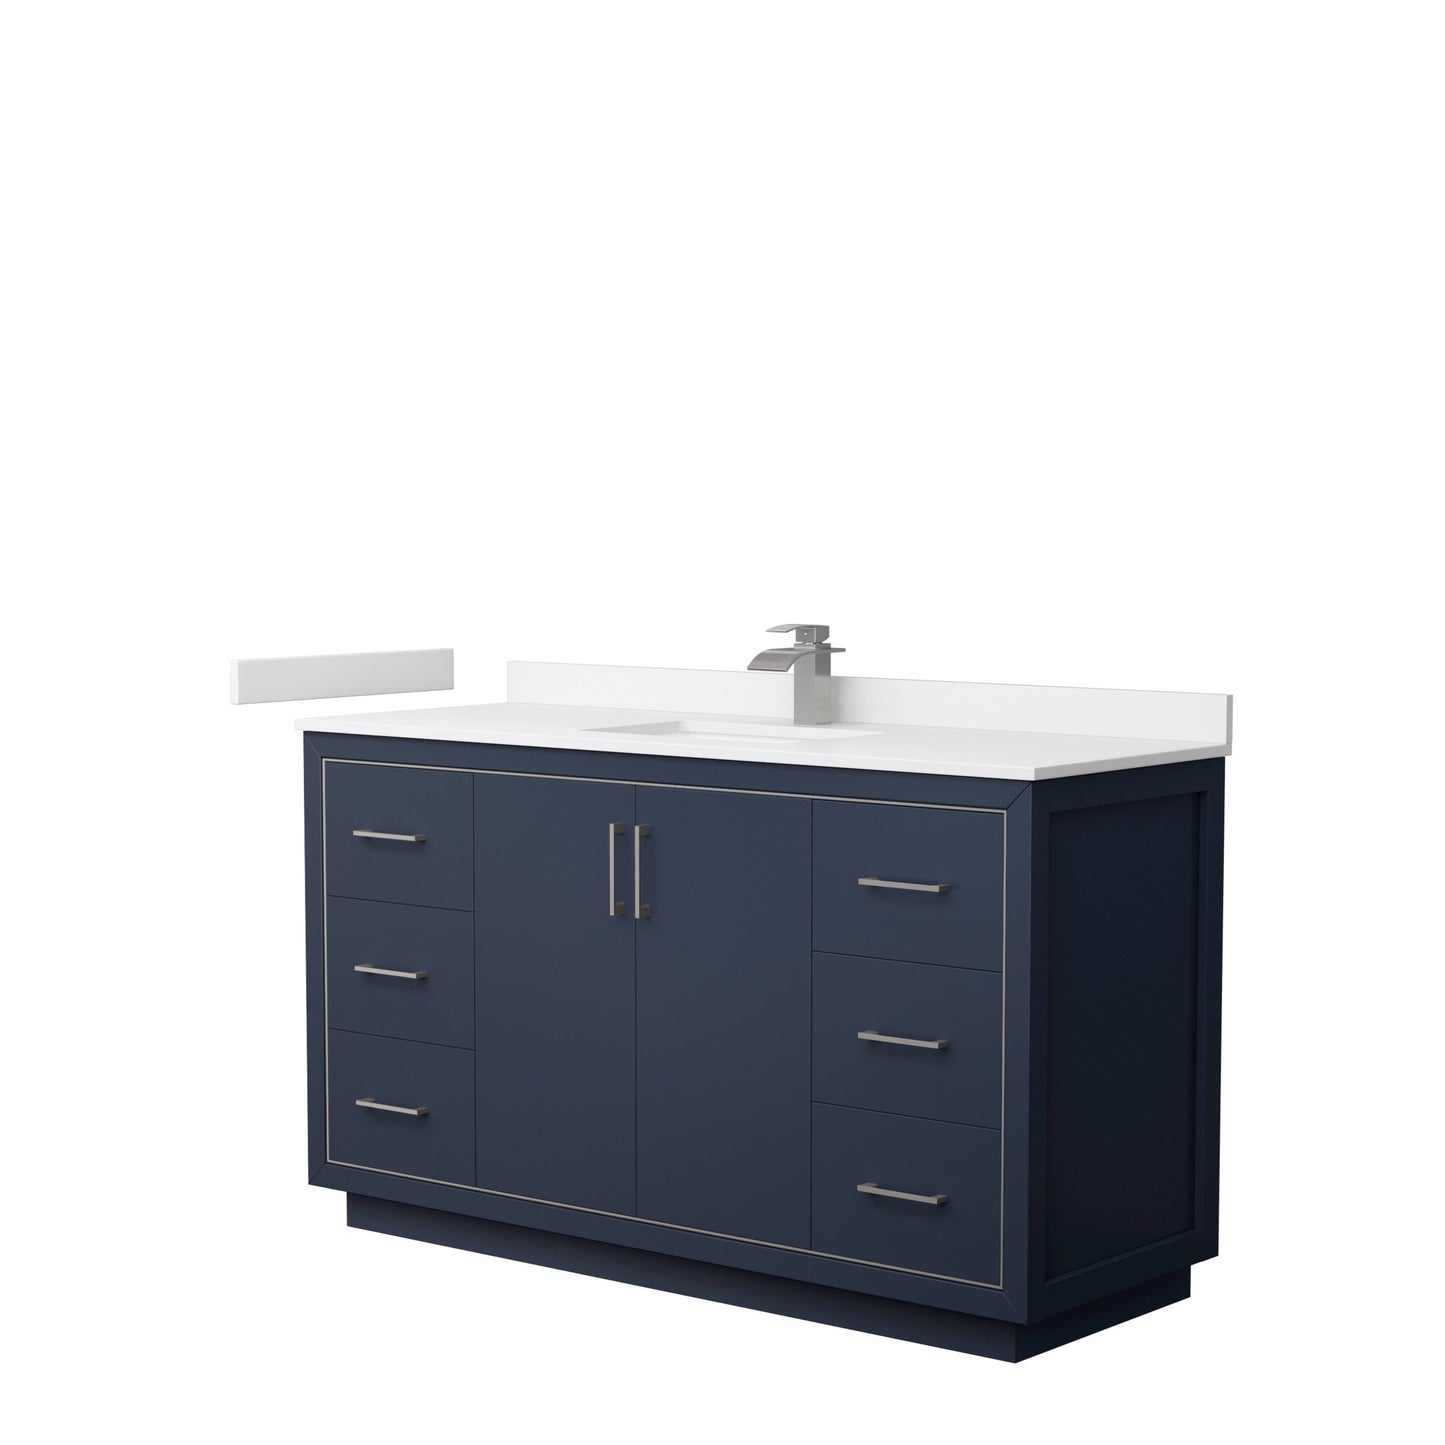 Wyndham Collection Icon 60" Single Bathroom Vanity in Dark Blue, White Cultured Marble Countertop, Undermount Square Sink, Brushed Nickel Trim